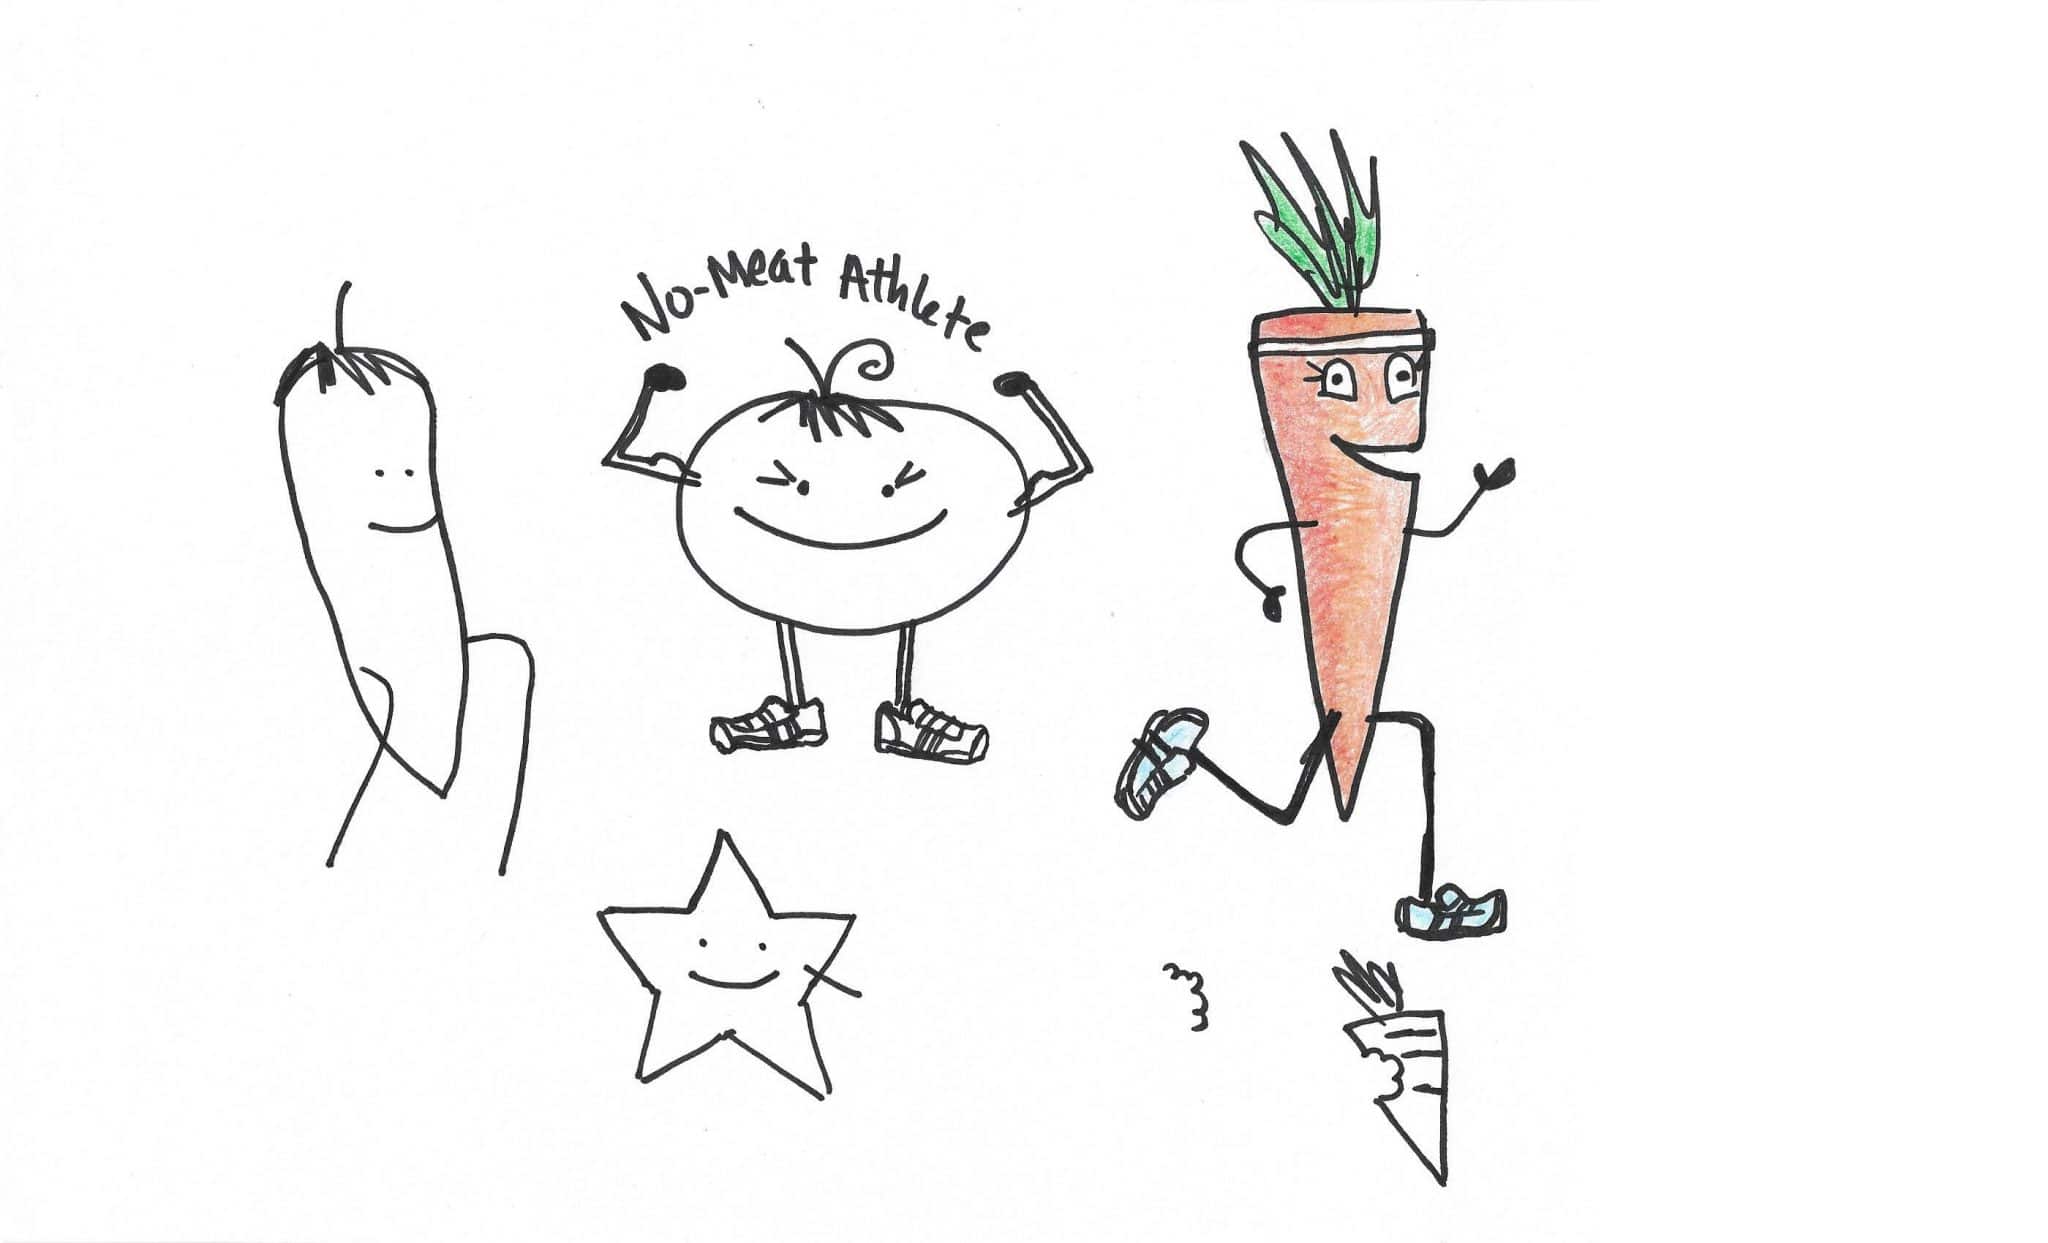 The running carrot is developed